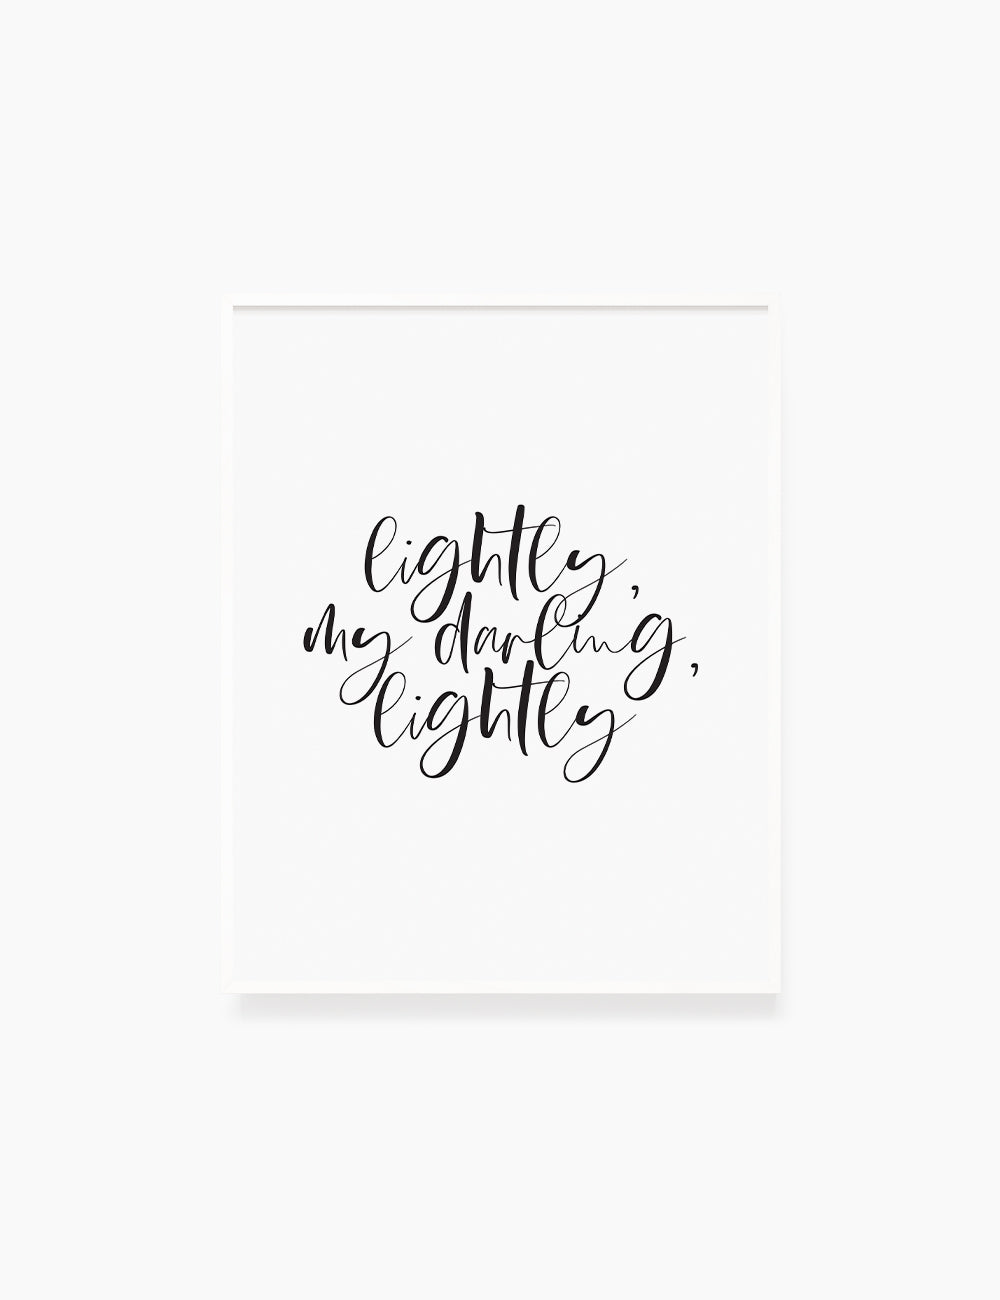 Printable Wall Art Quote: LIGHTLY, MY DARLING, LIGHTLY. Printable Poster. Inspirational Quote. WA043 - Paper Moon Art & Design